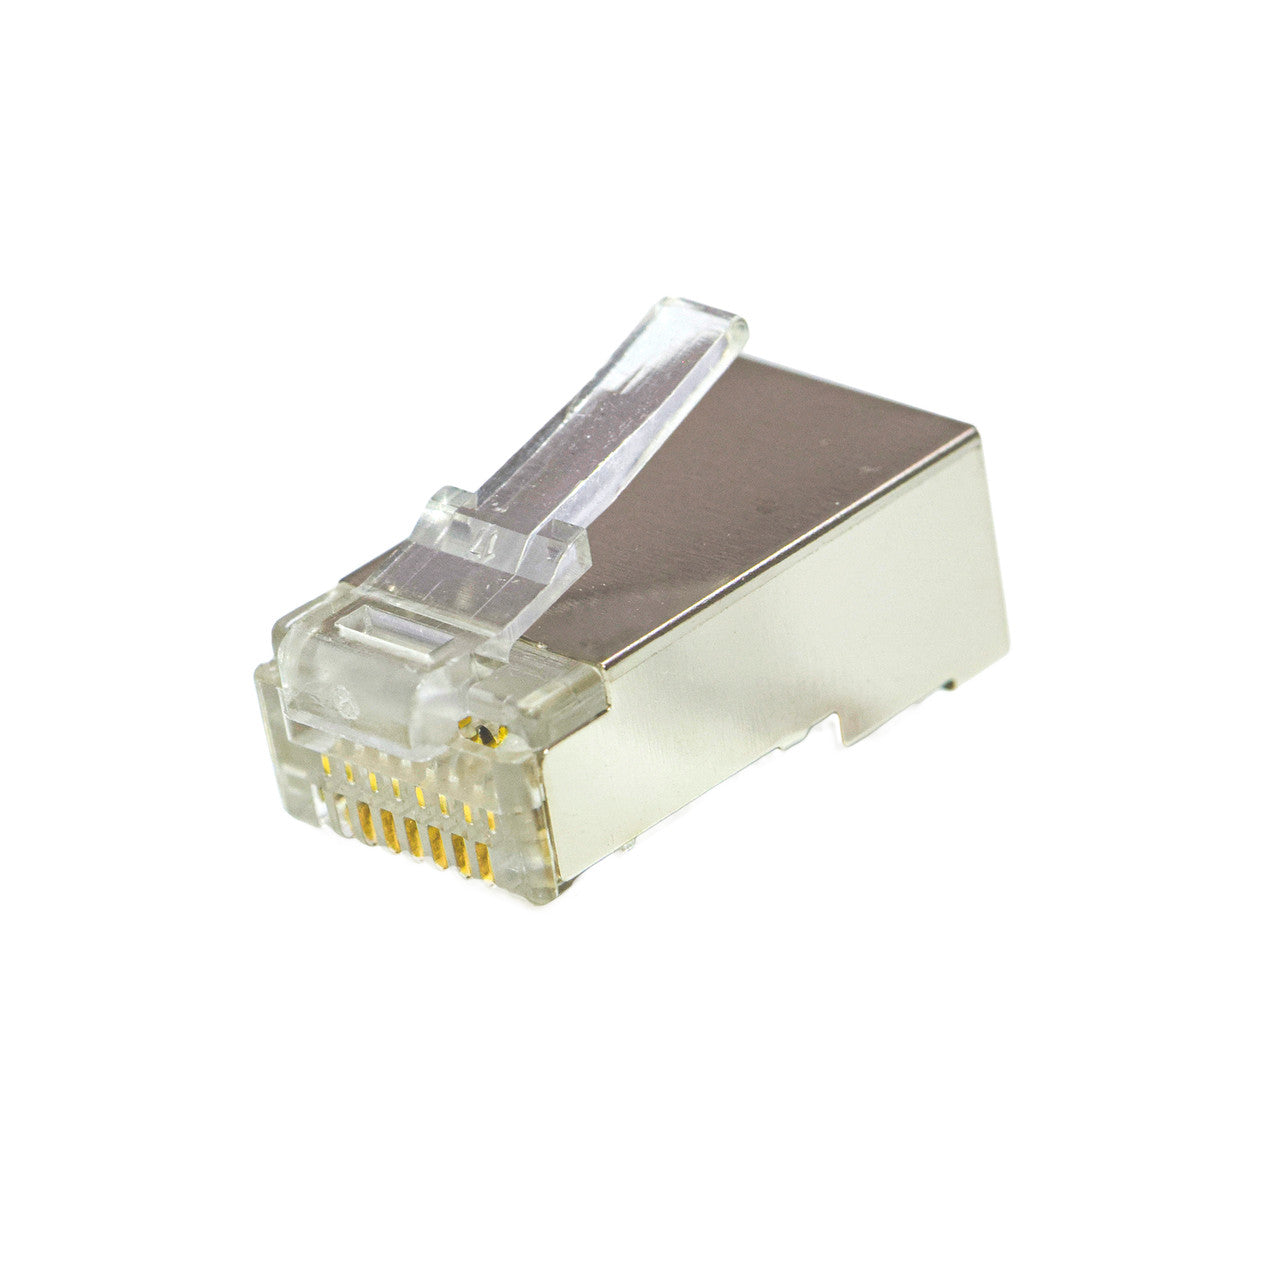 Category 6 Shielded RJ45 Modular Plug for Solid Cable